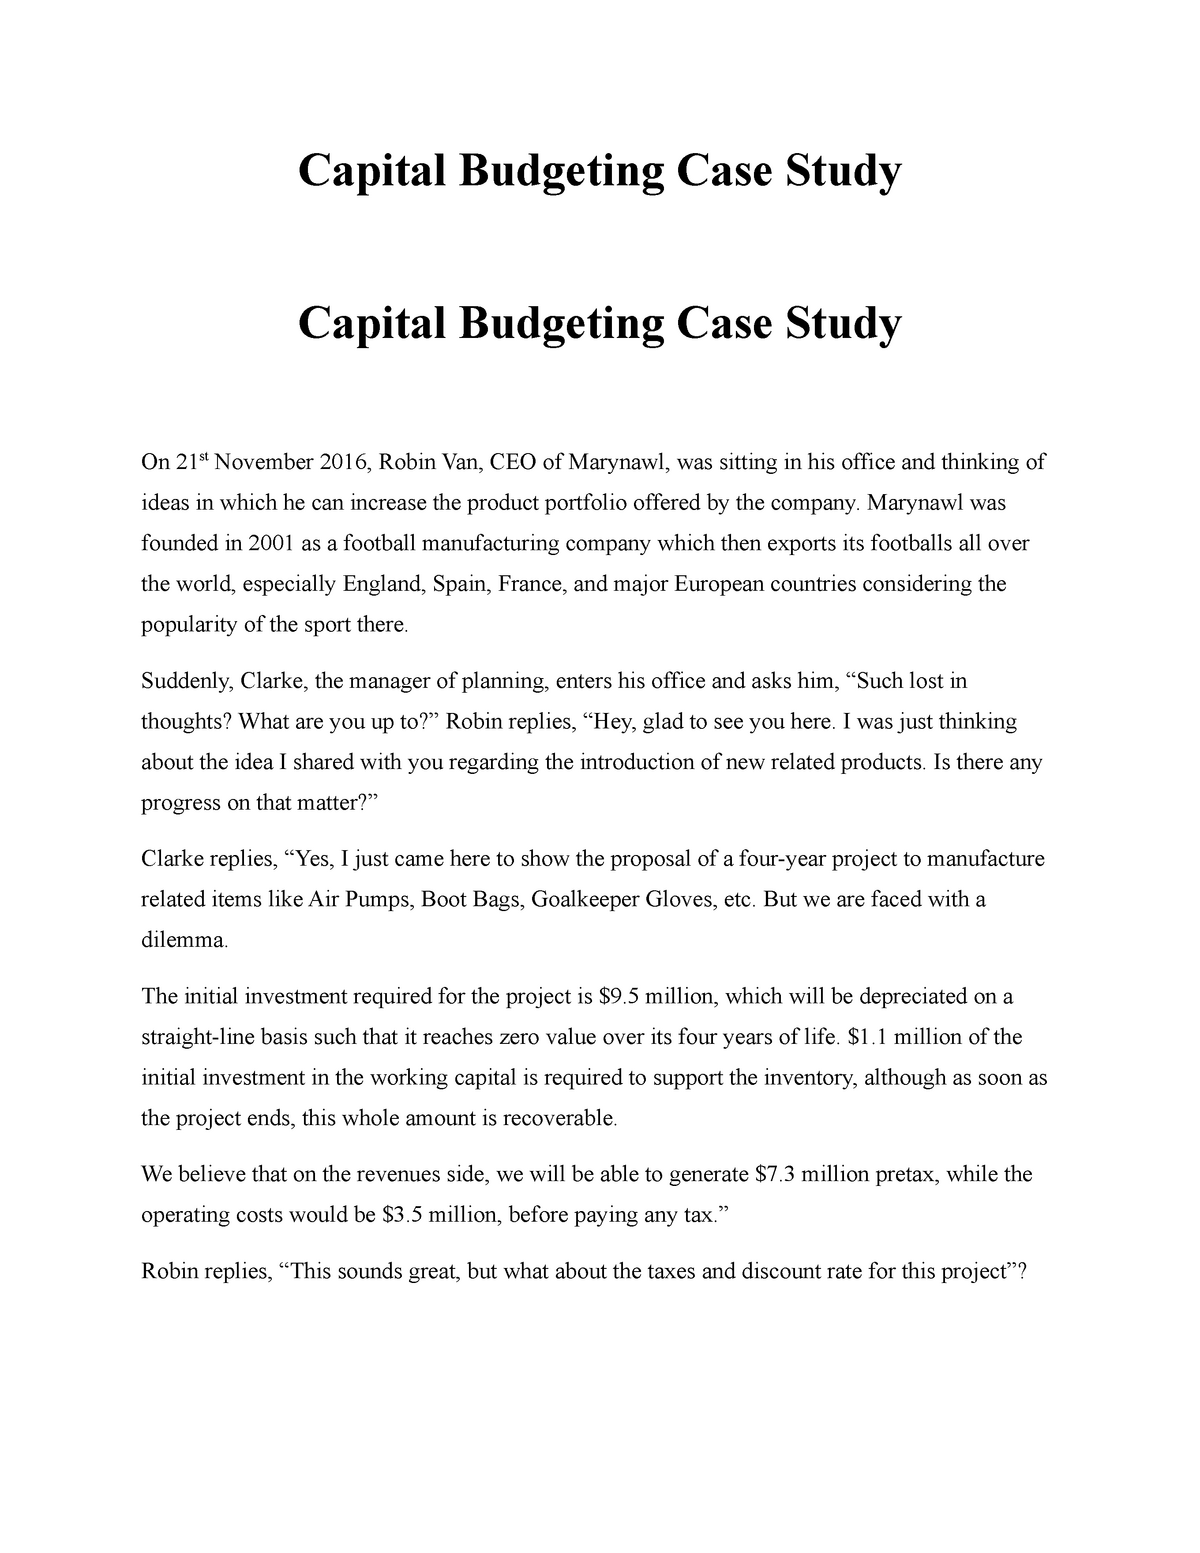 simple case study on capital budgeting